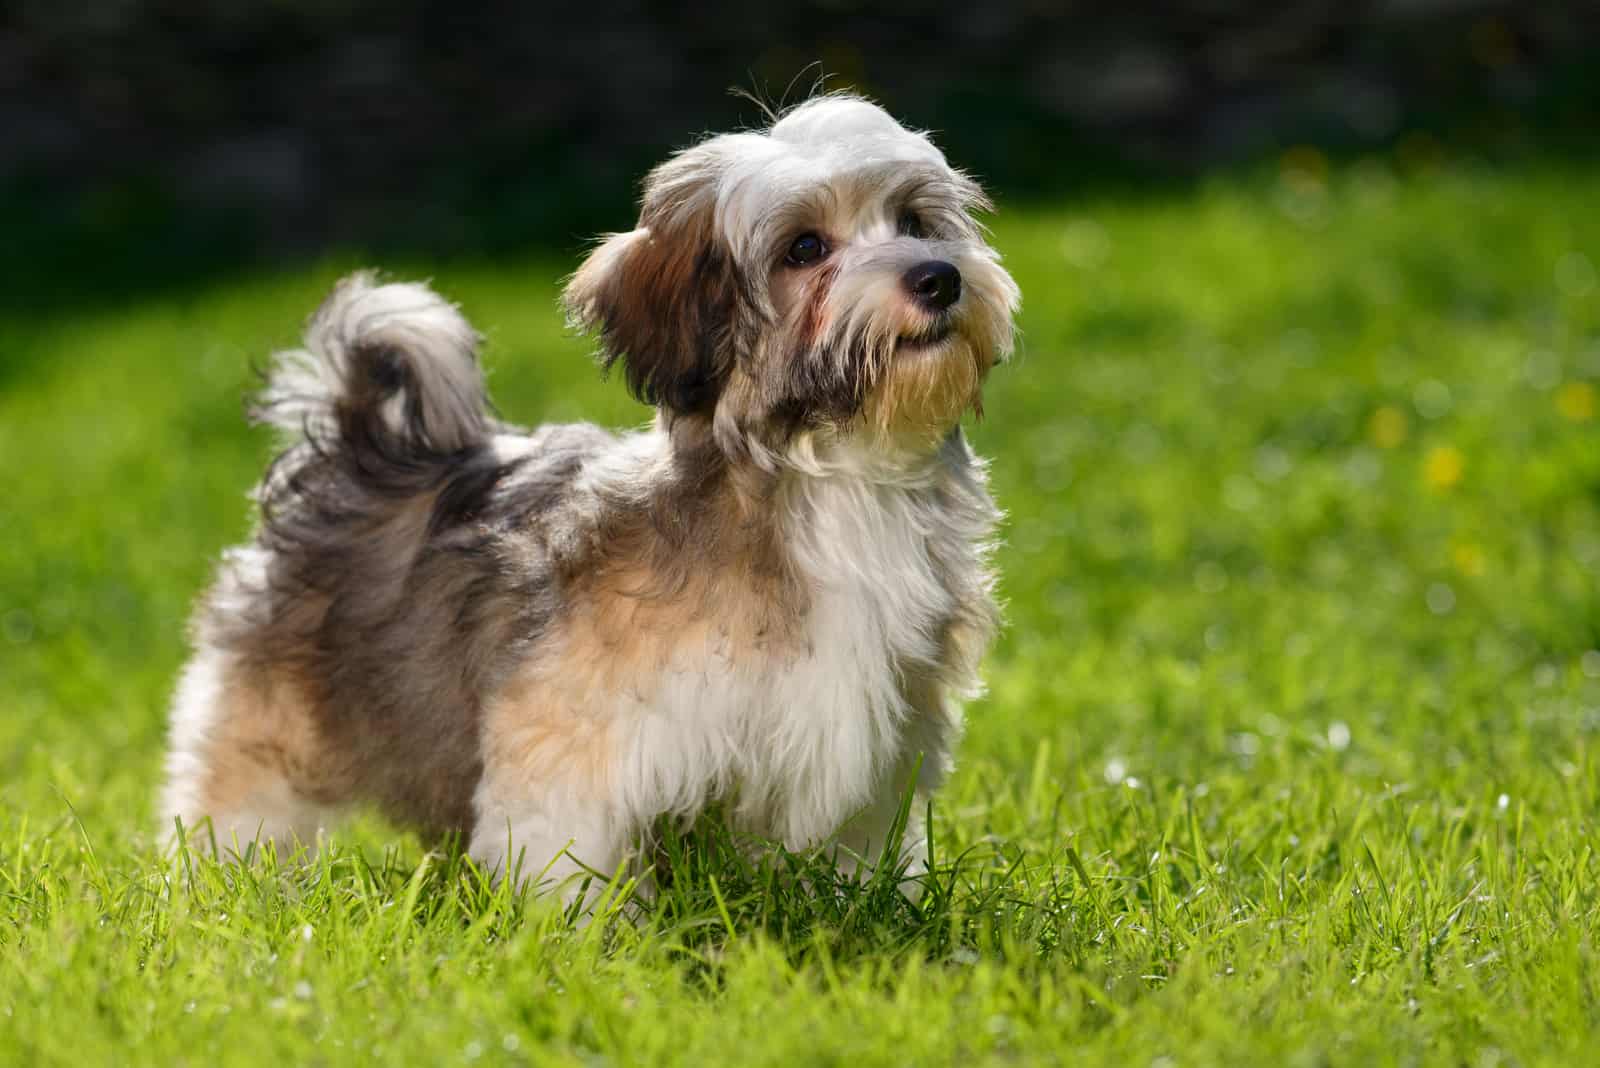 Cute little Havanese puppy dog stands on the grass